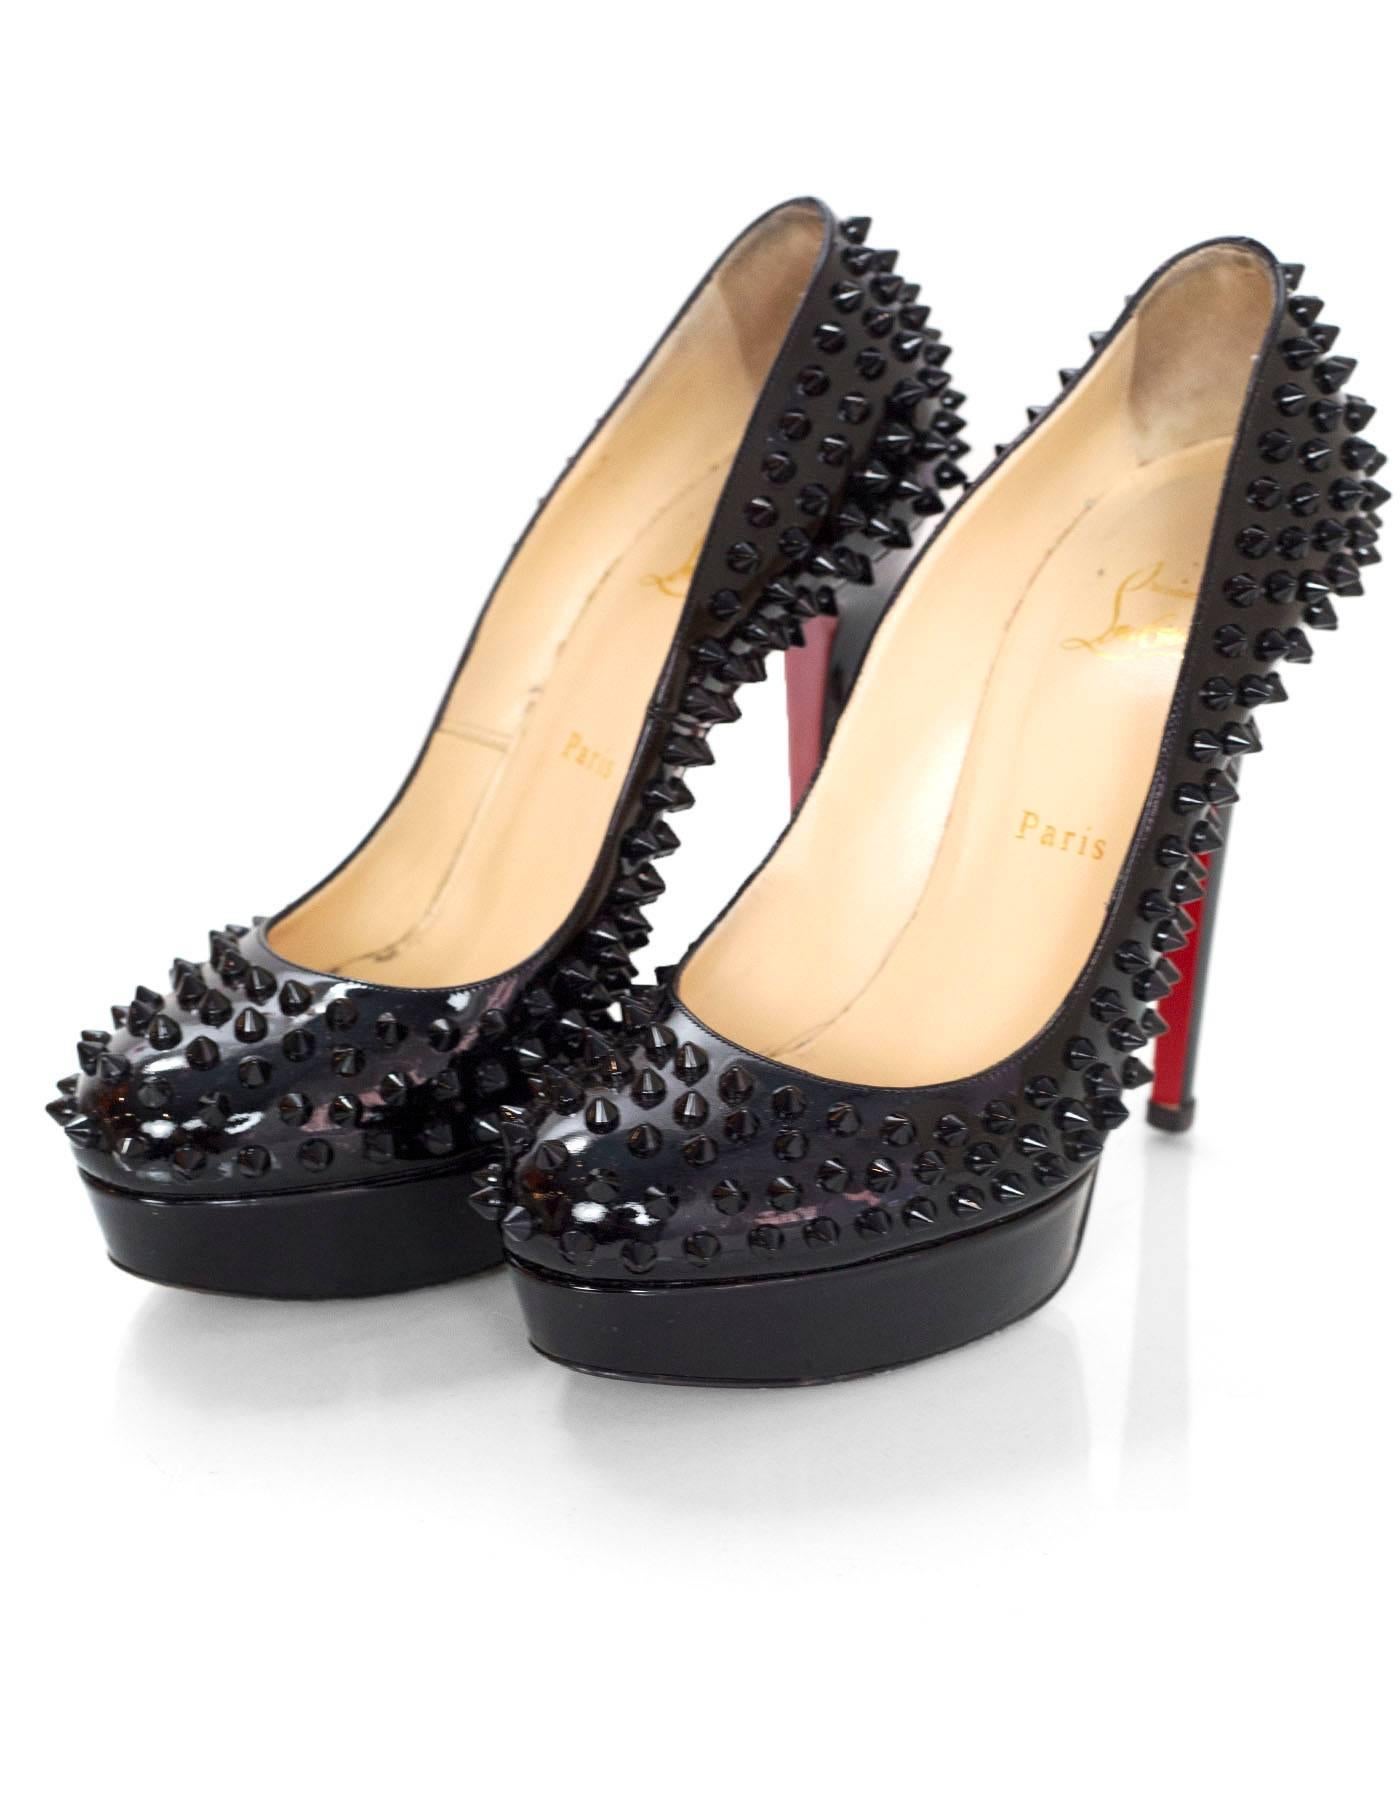 Christian Louboutin Black Spike Patent Leather Bianca 140 Pumps Sz 39

Made In: Italy
Color: Black
Materials: Patent leather
Closure/Opening: Slide on
Sole Stamp: Christian Louboutin Made in Italy 39
Retail Price: $1,295 + tax
Overall Condition: